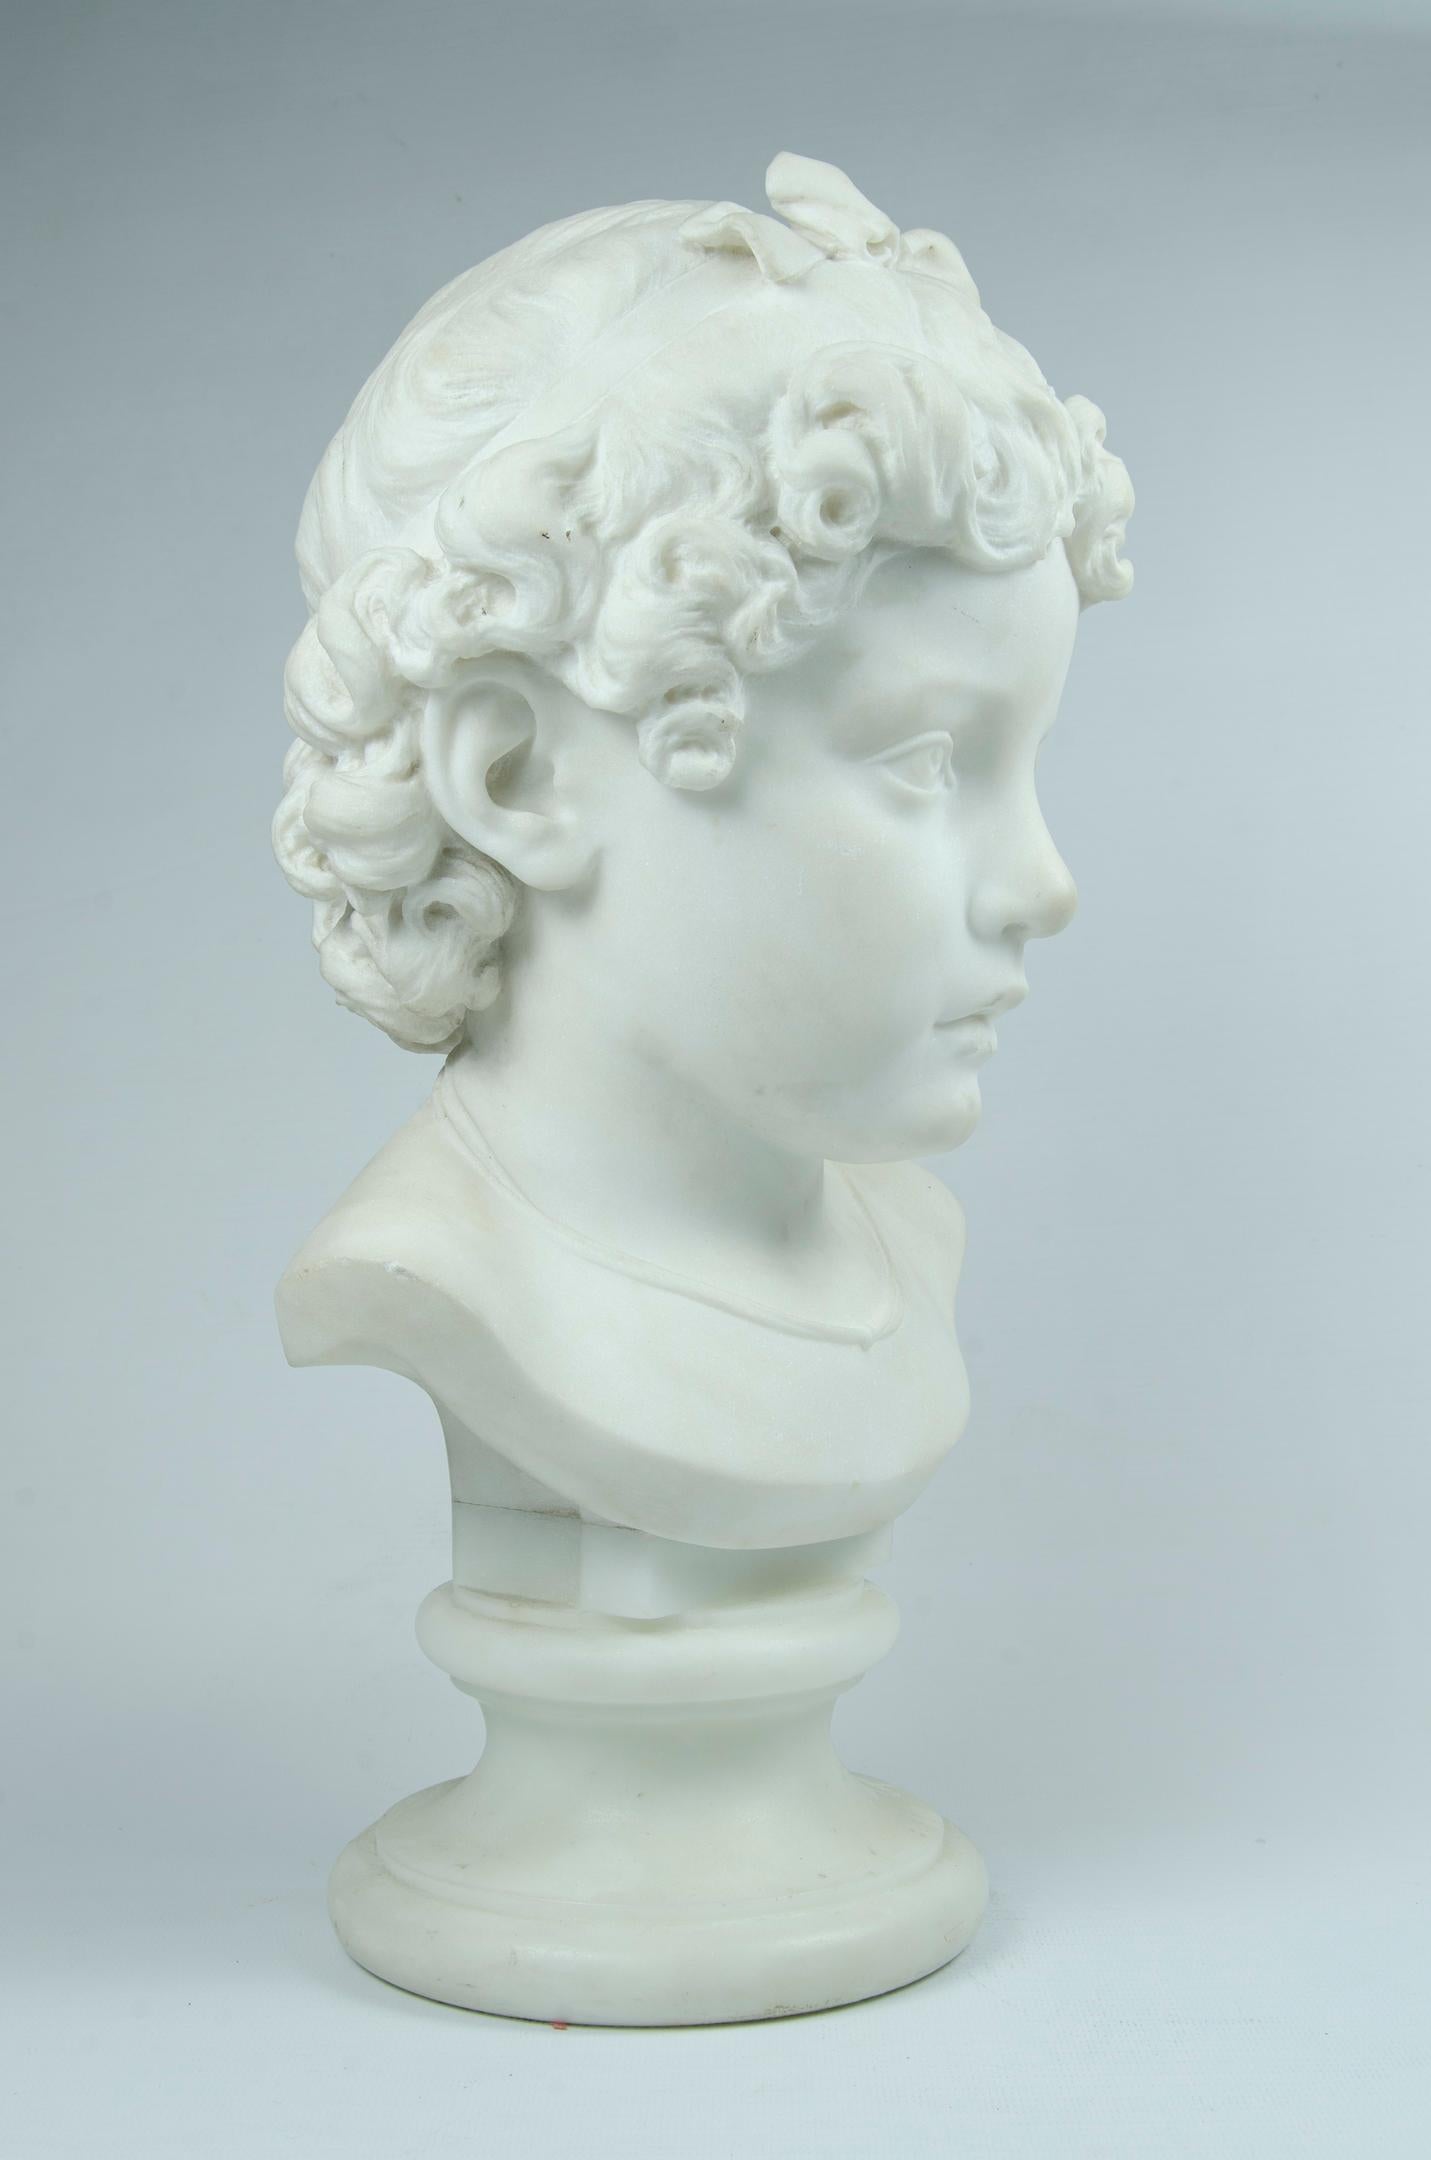 Marble sculpture (bust of a child) F. Gerth
Origin Italy, Rome circa 1900
perfect condition without restorations
Artist: F. Gerth.